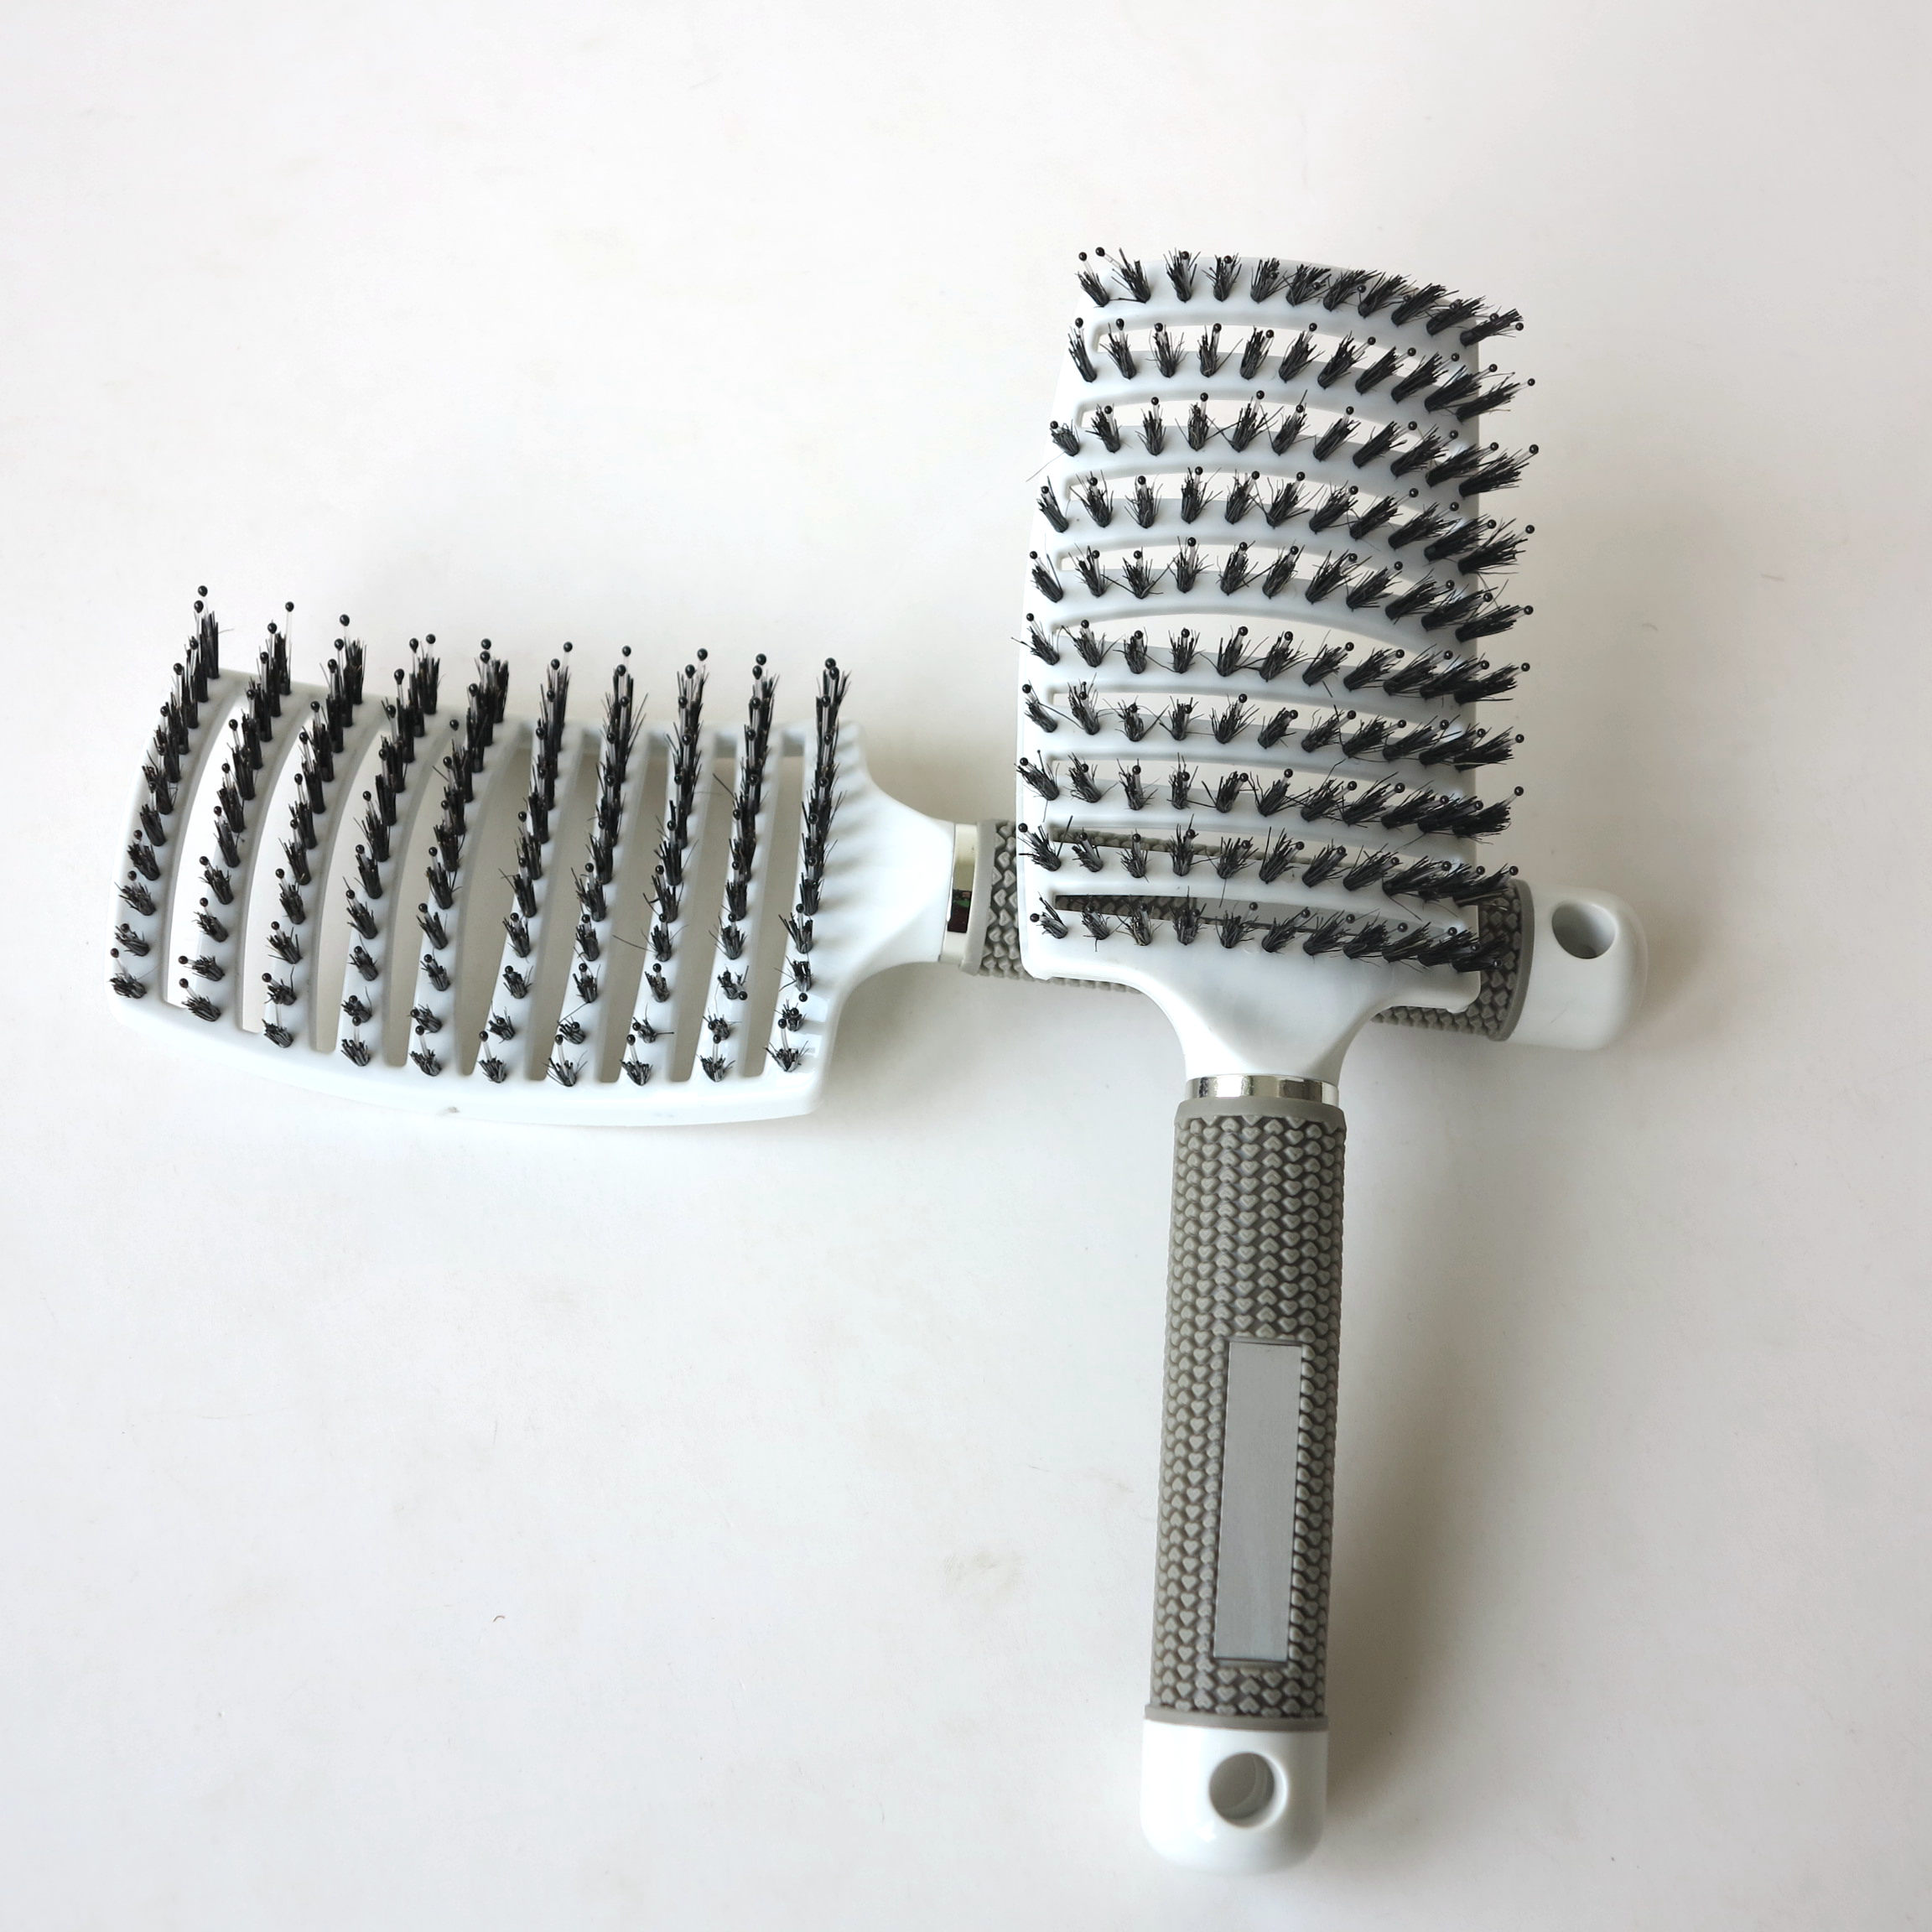 

New Anti-static Heat Curved Vent Barber Salon Hair Styling Tool Rows Tine Comb Plastic Bristle Hair Brushes 1 PC Free Shipping